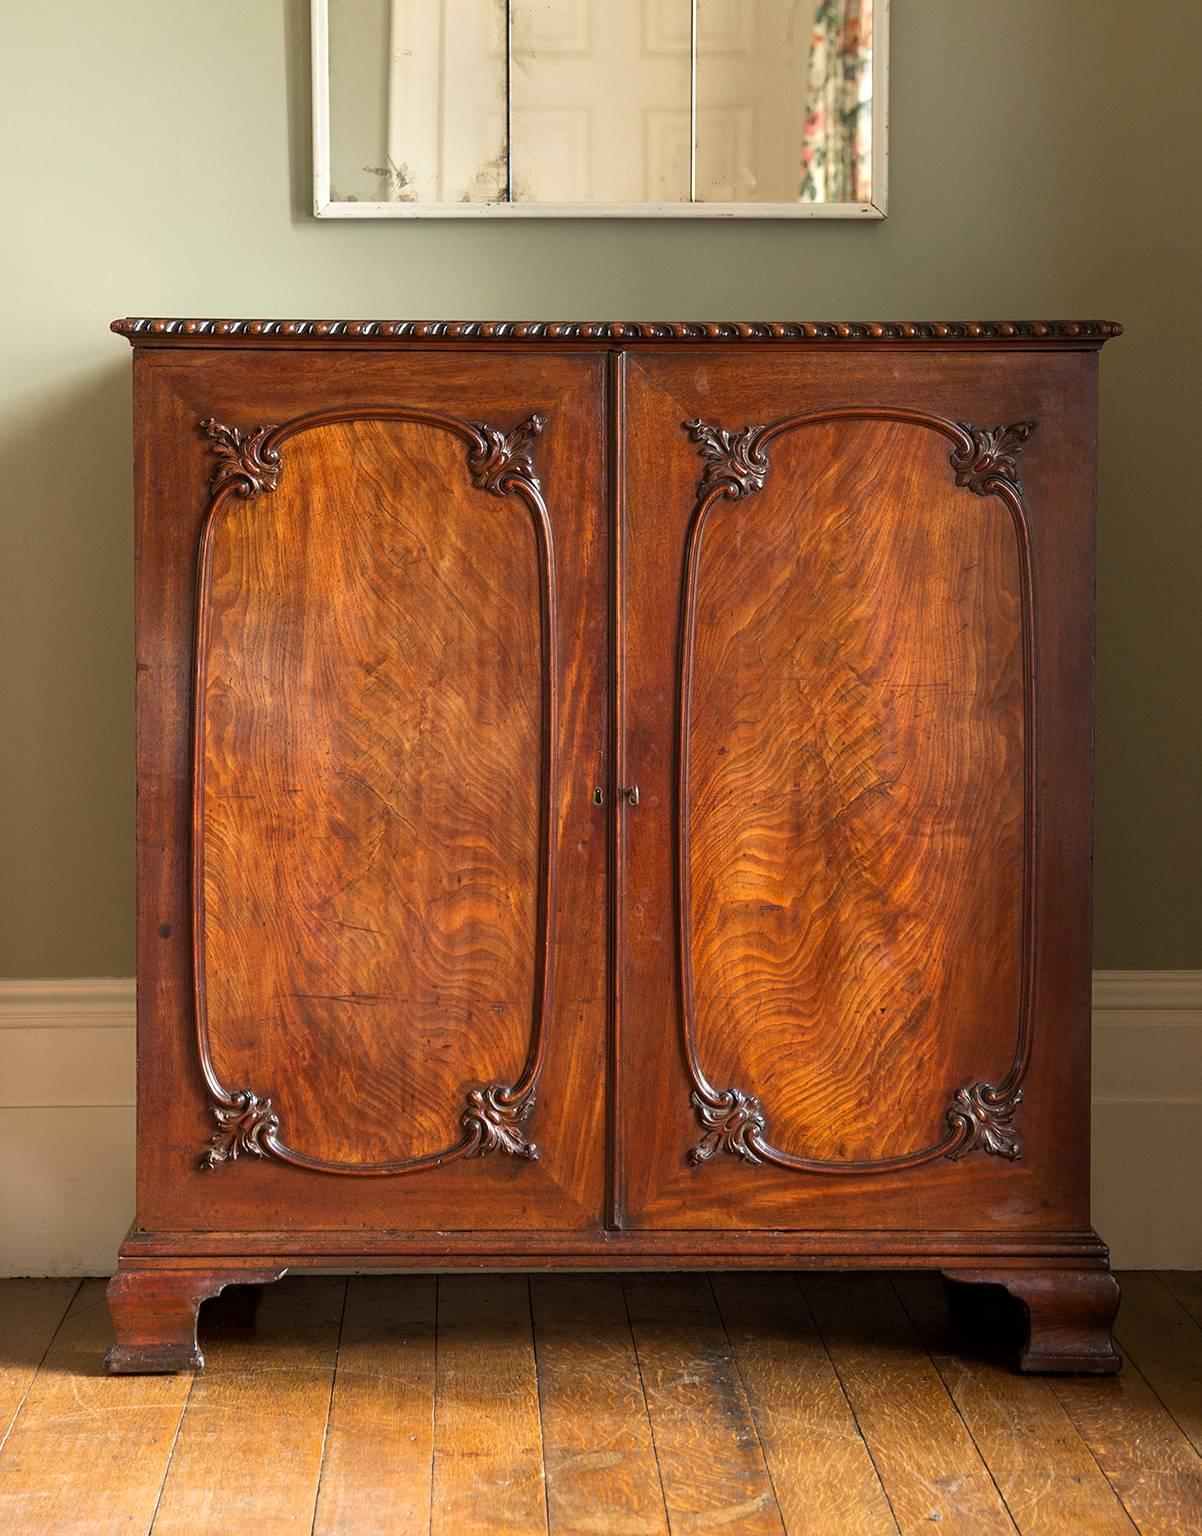 A fine and rare Gentleman's Press, the solid timber top with gadrooned edge sits above a pair of rectangular doors inset with beautifully figured flame mahogany veneer panels carved in each corner with scrolling leaf decoration in the Rococo style.